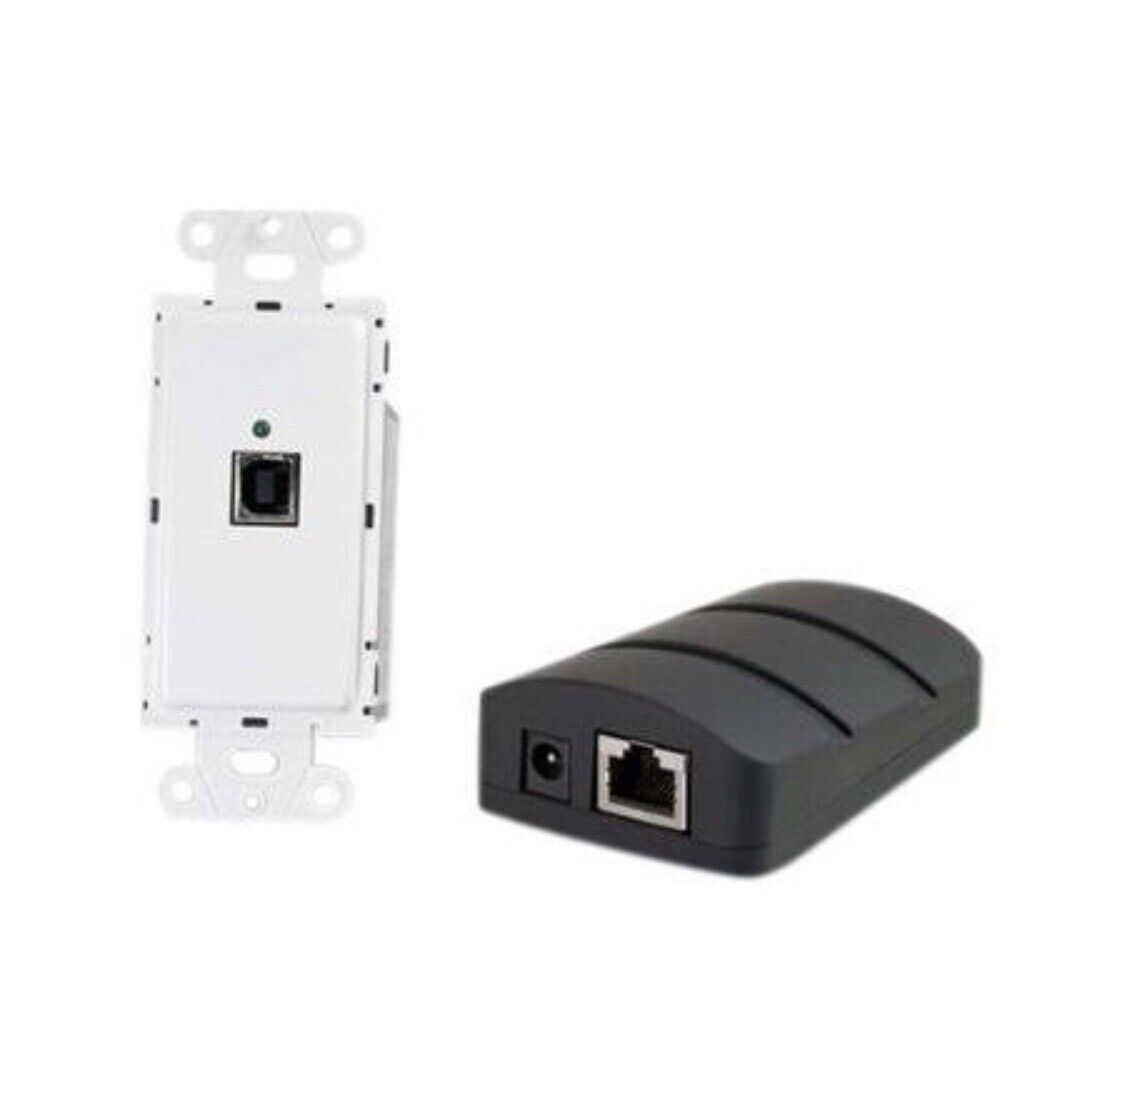 Legrand C2G 53880 USB 2.0 Over CAT5 Superbooster Wall Plate